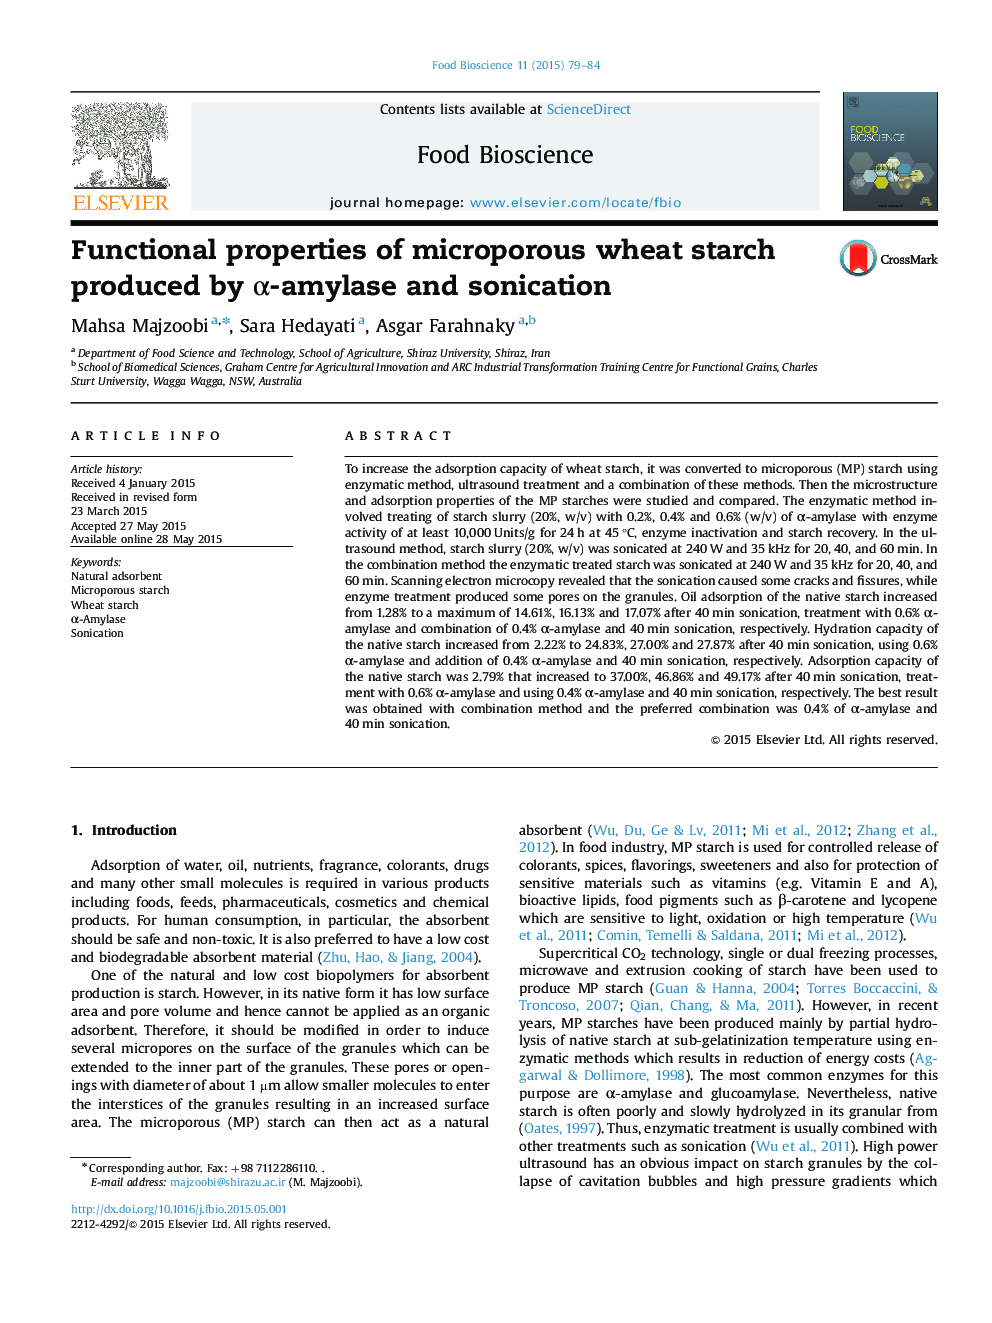 Functional properties of microporous wheat starch produced by α-amylase and sonication